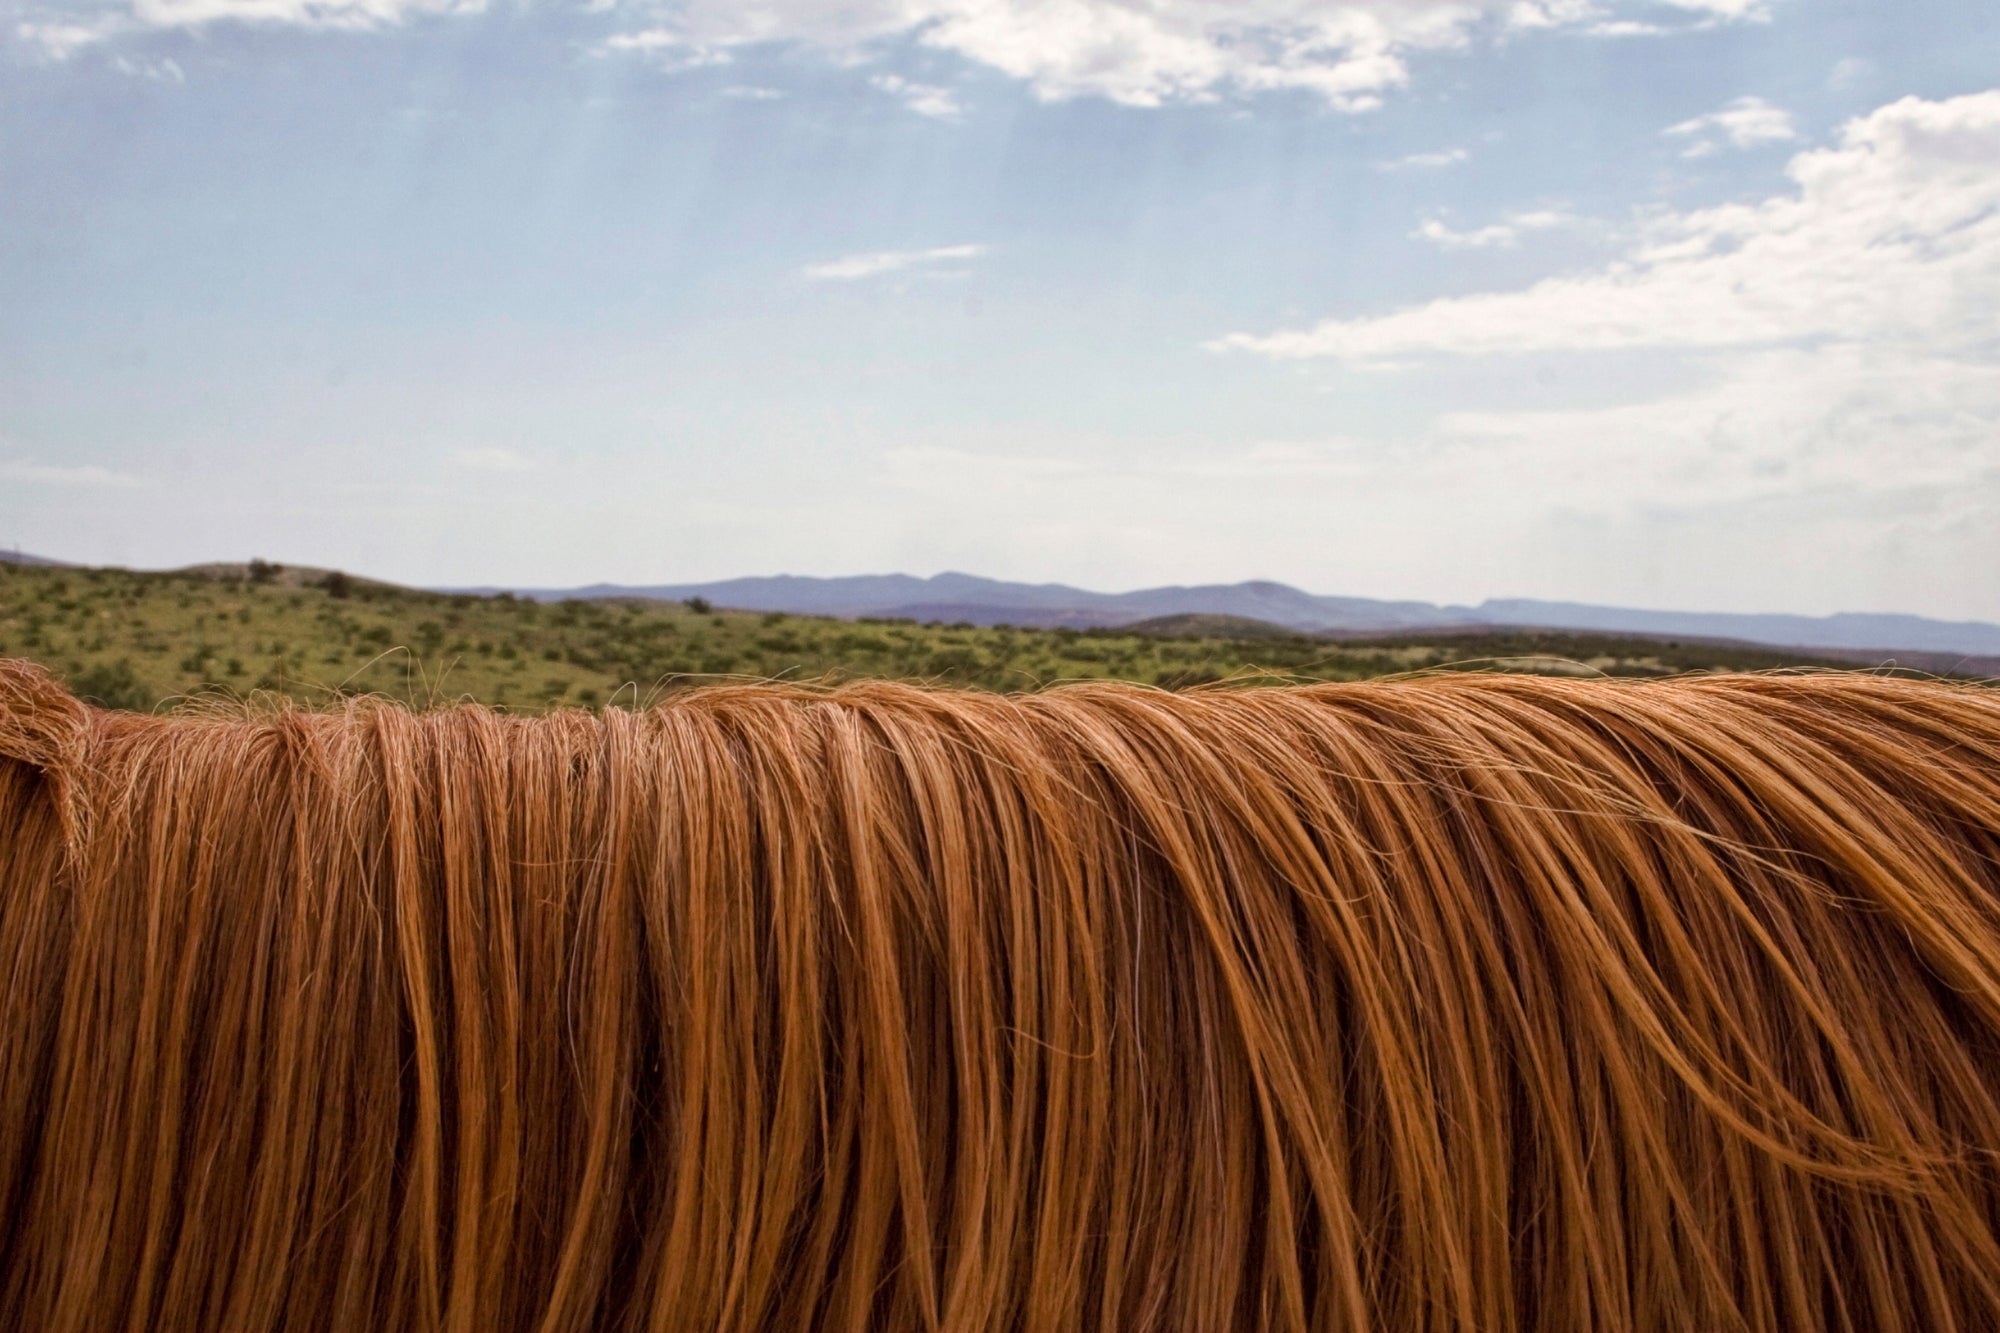 How To Pull A Horse's Mane